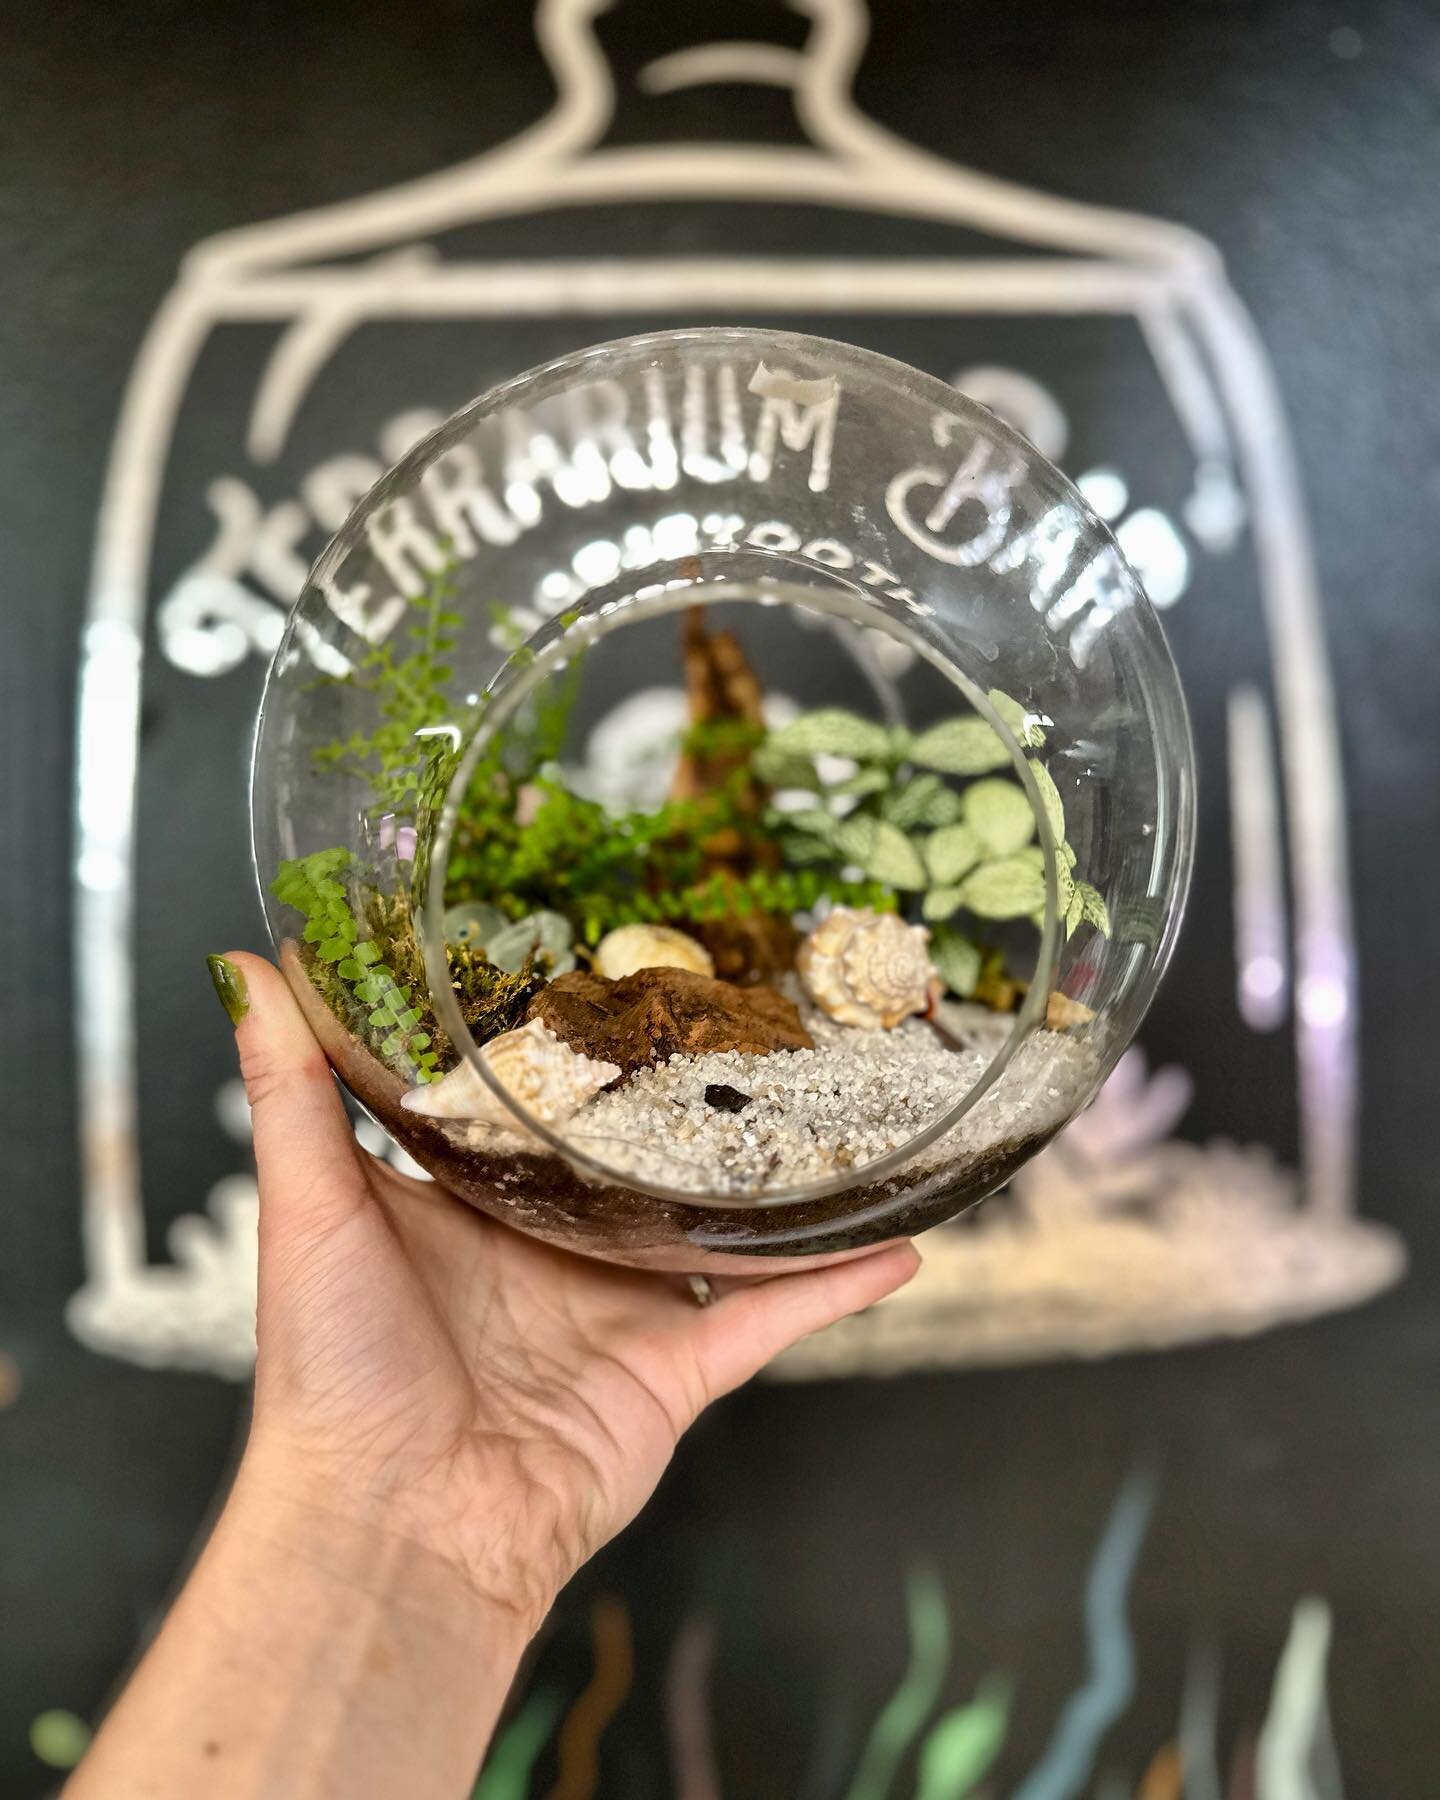 It&rsquo;s the weekendddd! Bring your friends and fam in and make your very own little mini moss oasis!🌱

We&rsquo;ve been busy busy stocking up the shop and making it EXTRA✨ good in here!!

Lots of new product hit the floor this week so swing by an